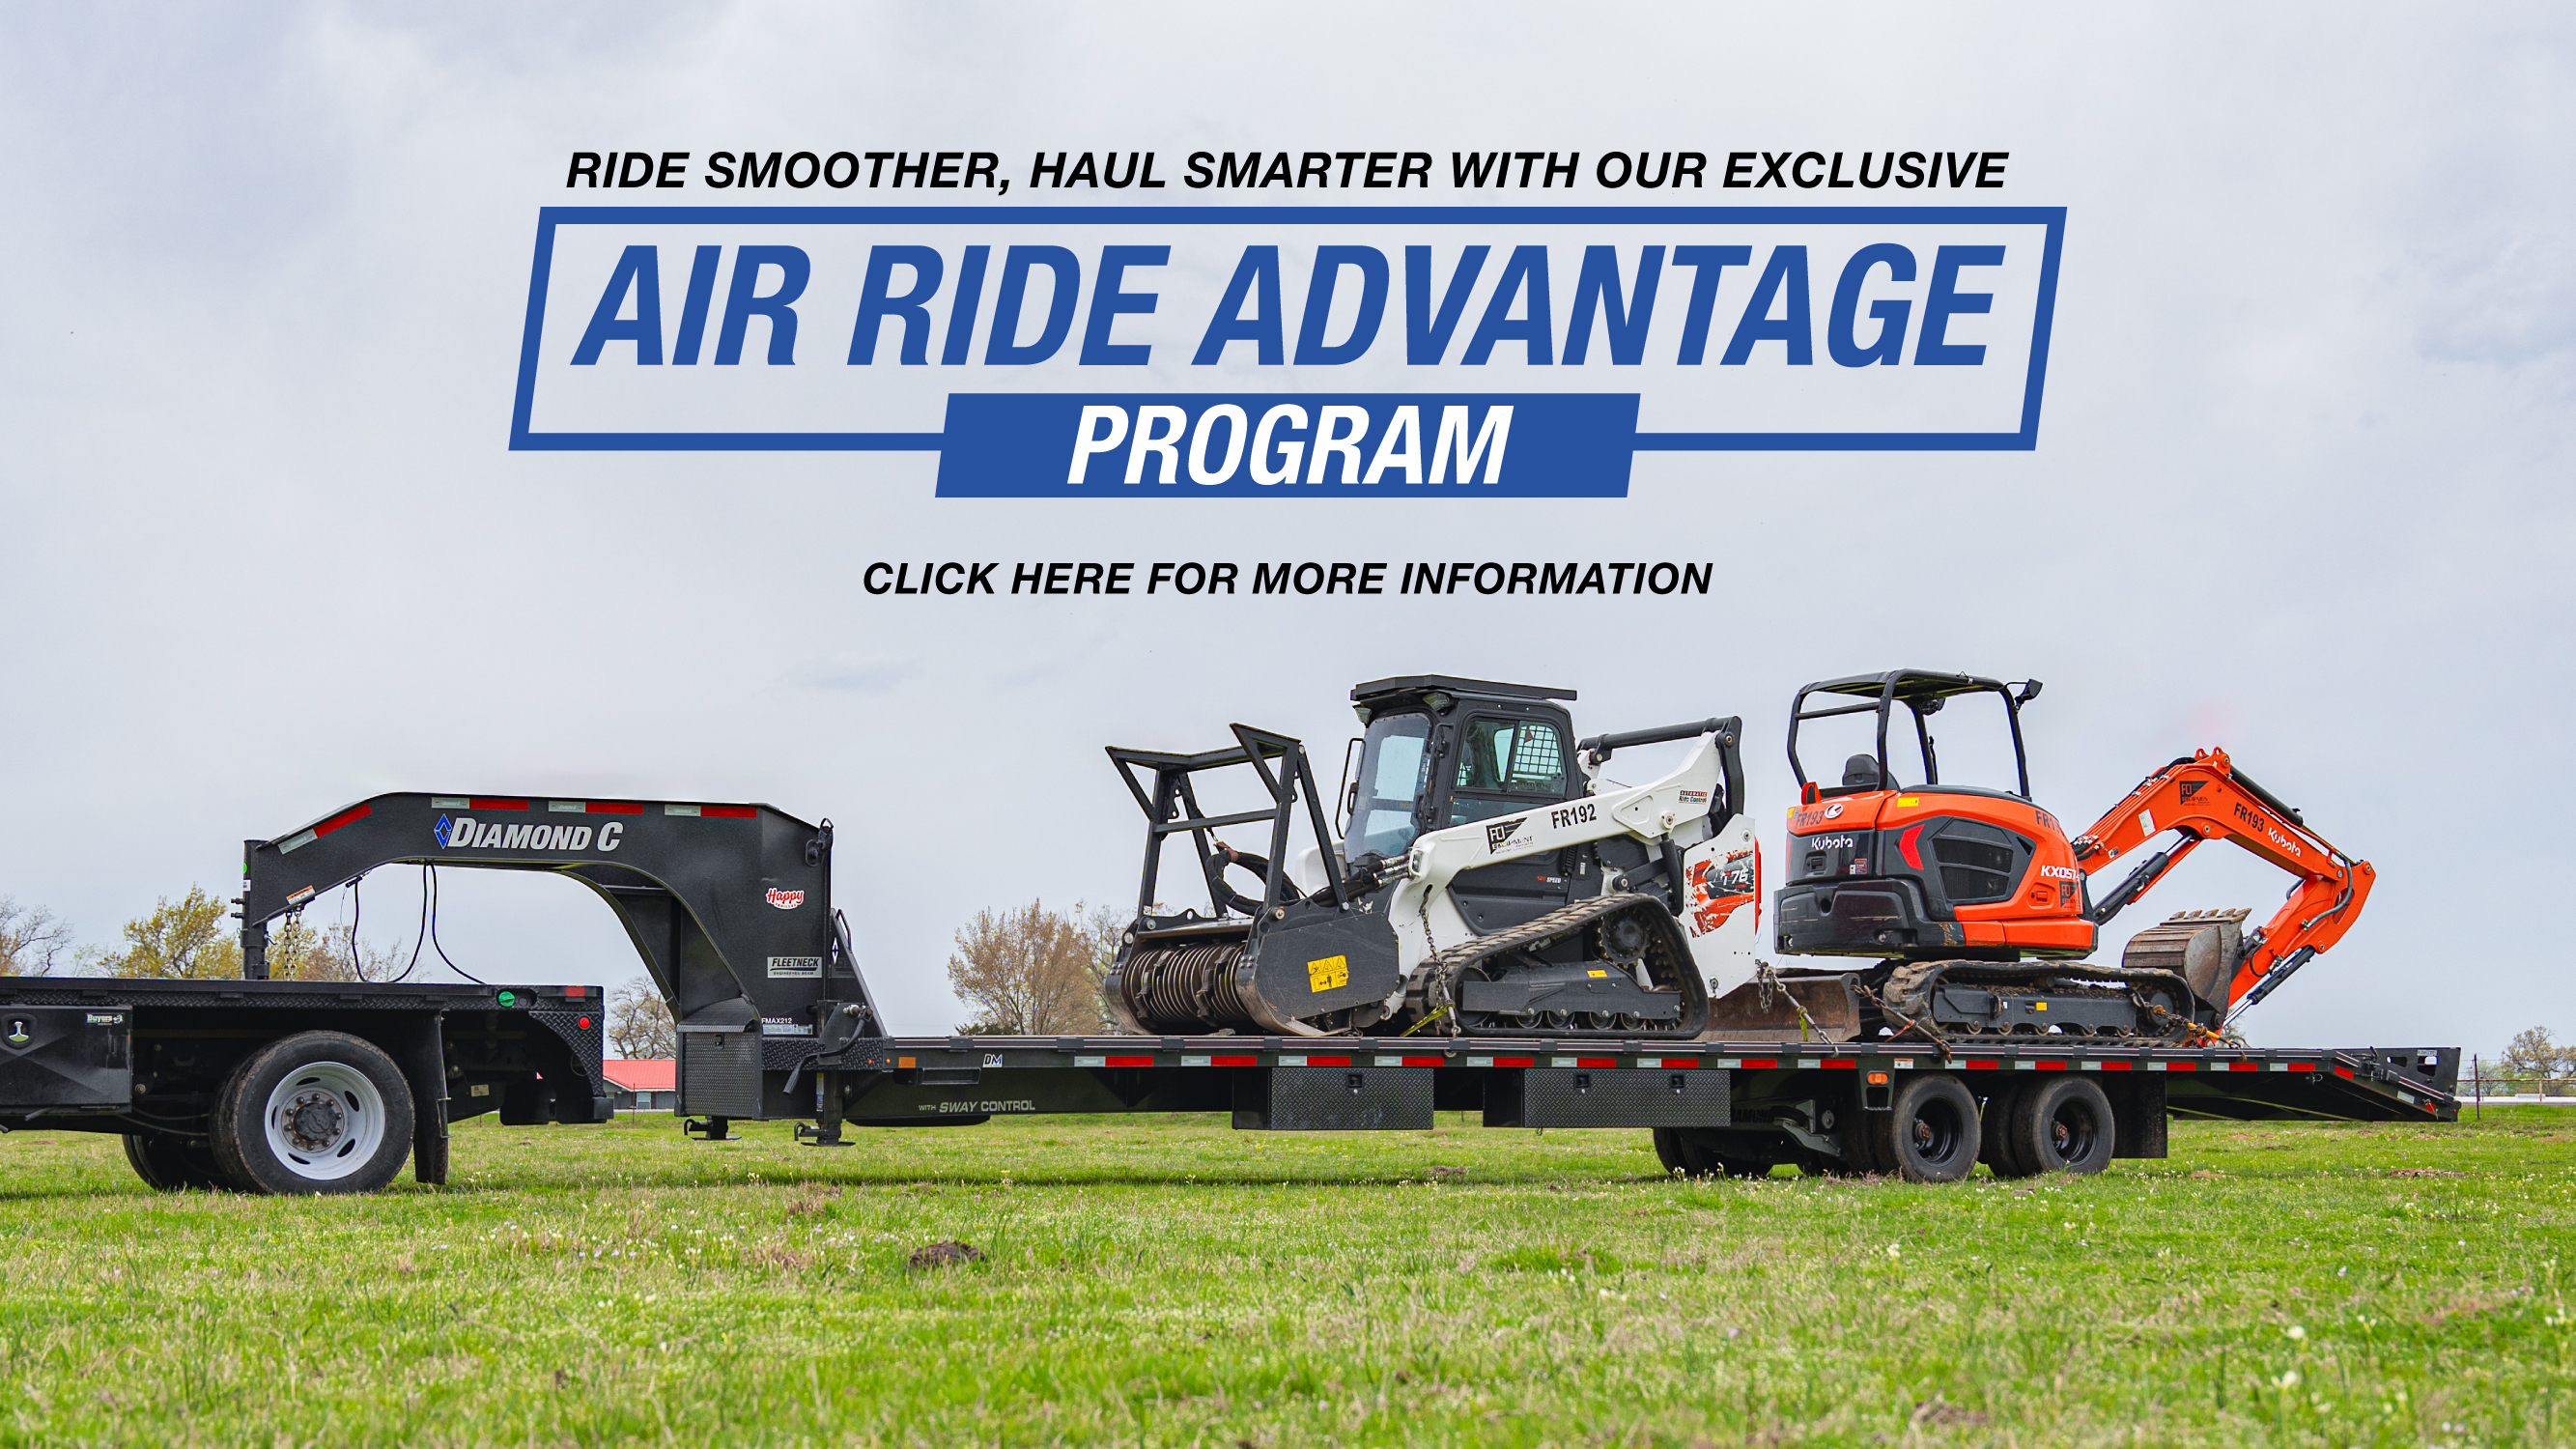 Air Ride Advantage Program for Air Ride Gooseneck and Step Deck Trailers